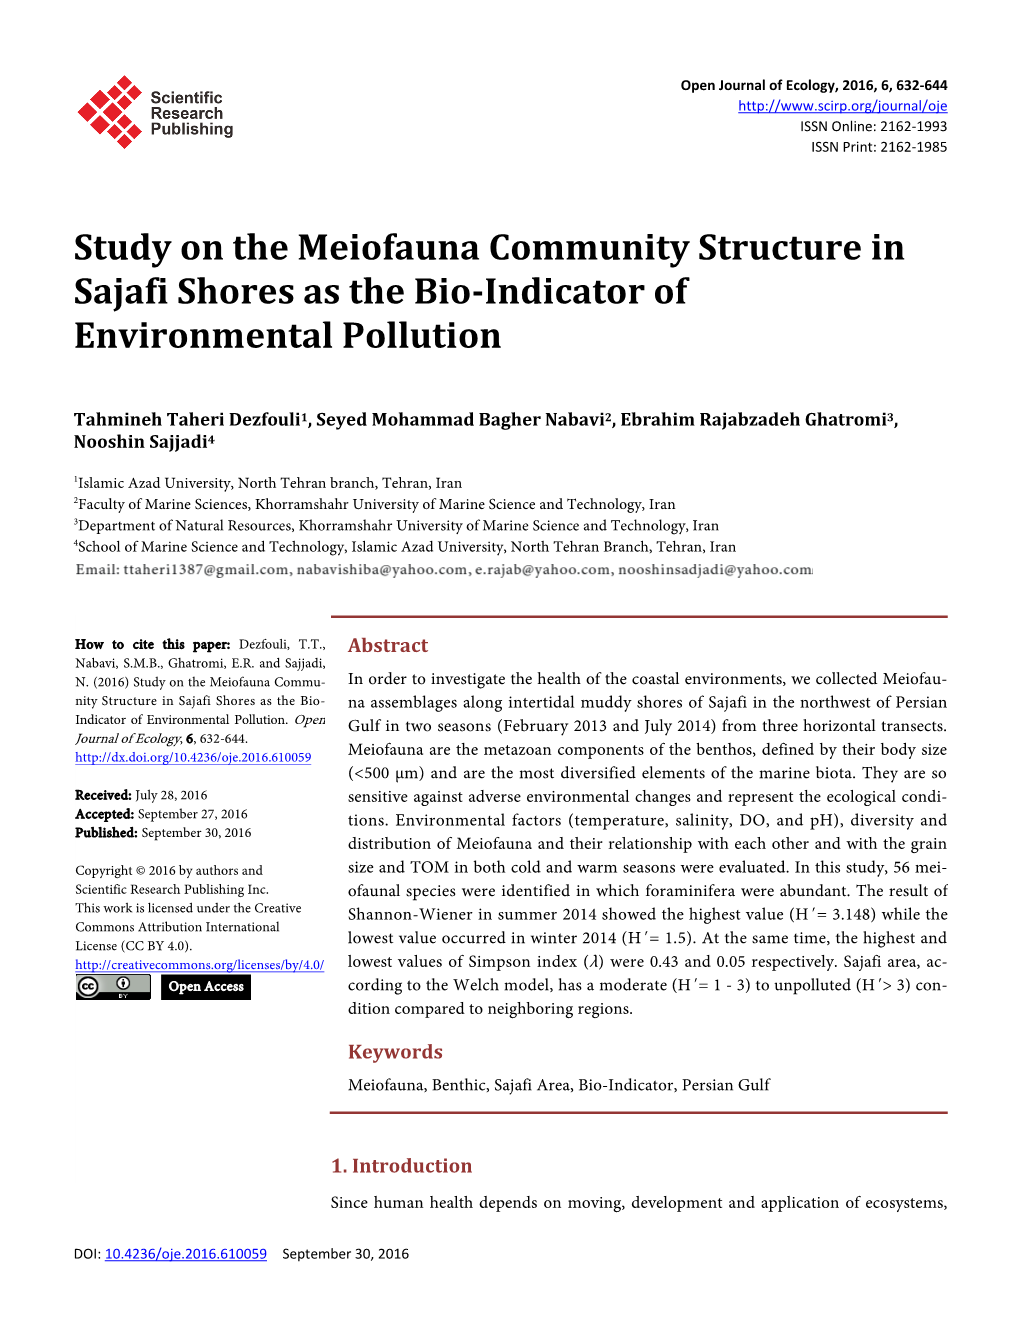 Study on the Meiofauna Community Structure in Sajafi Shores As the Bio-Indicator of Environmental Pollution